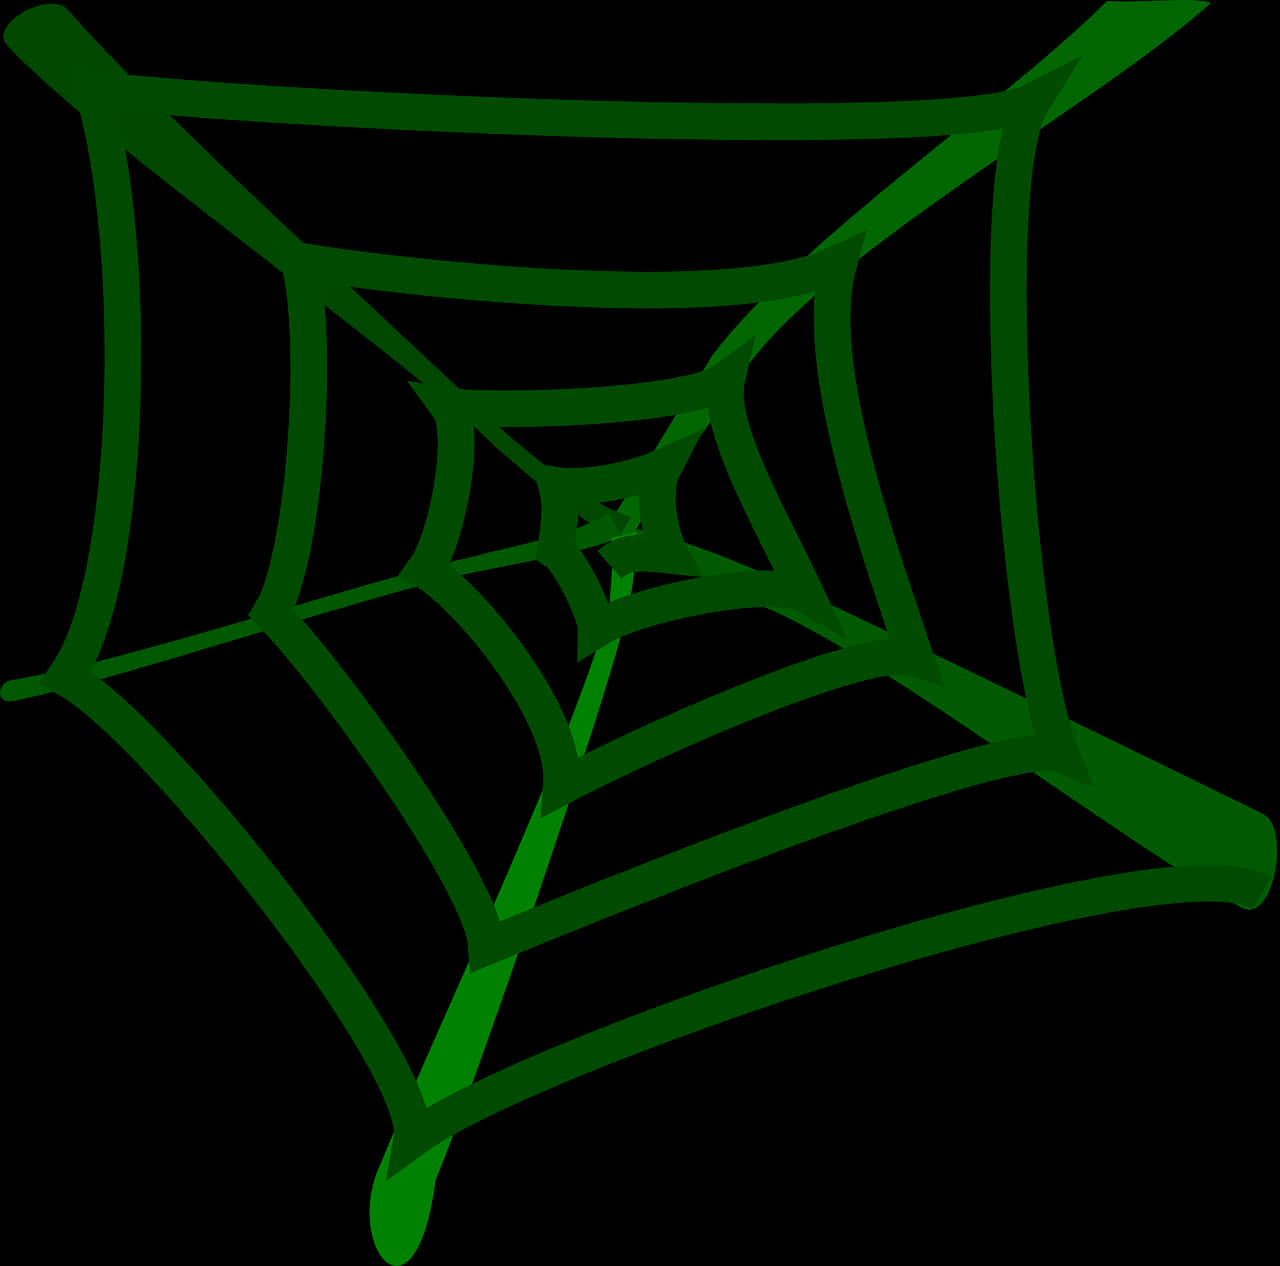 Green Spider Web Graphic PNG